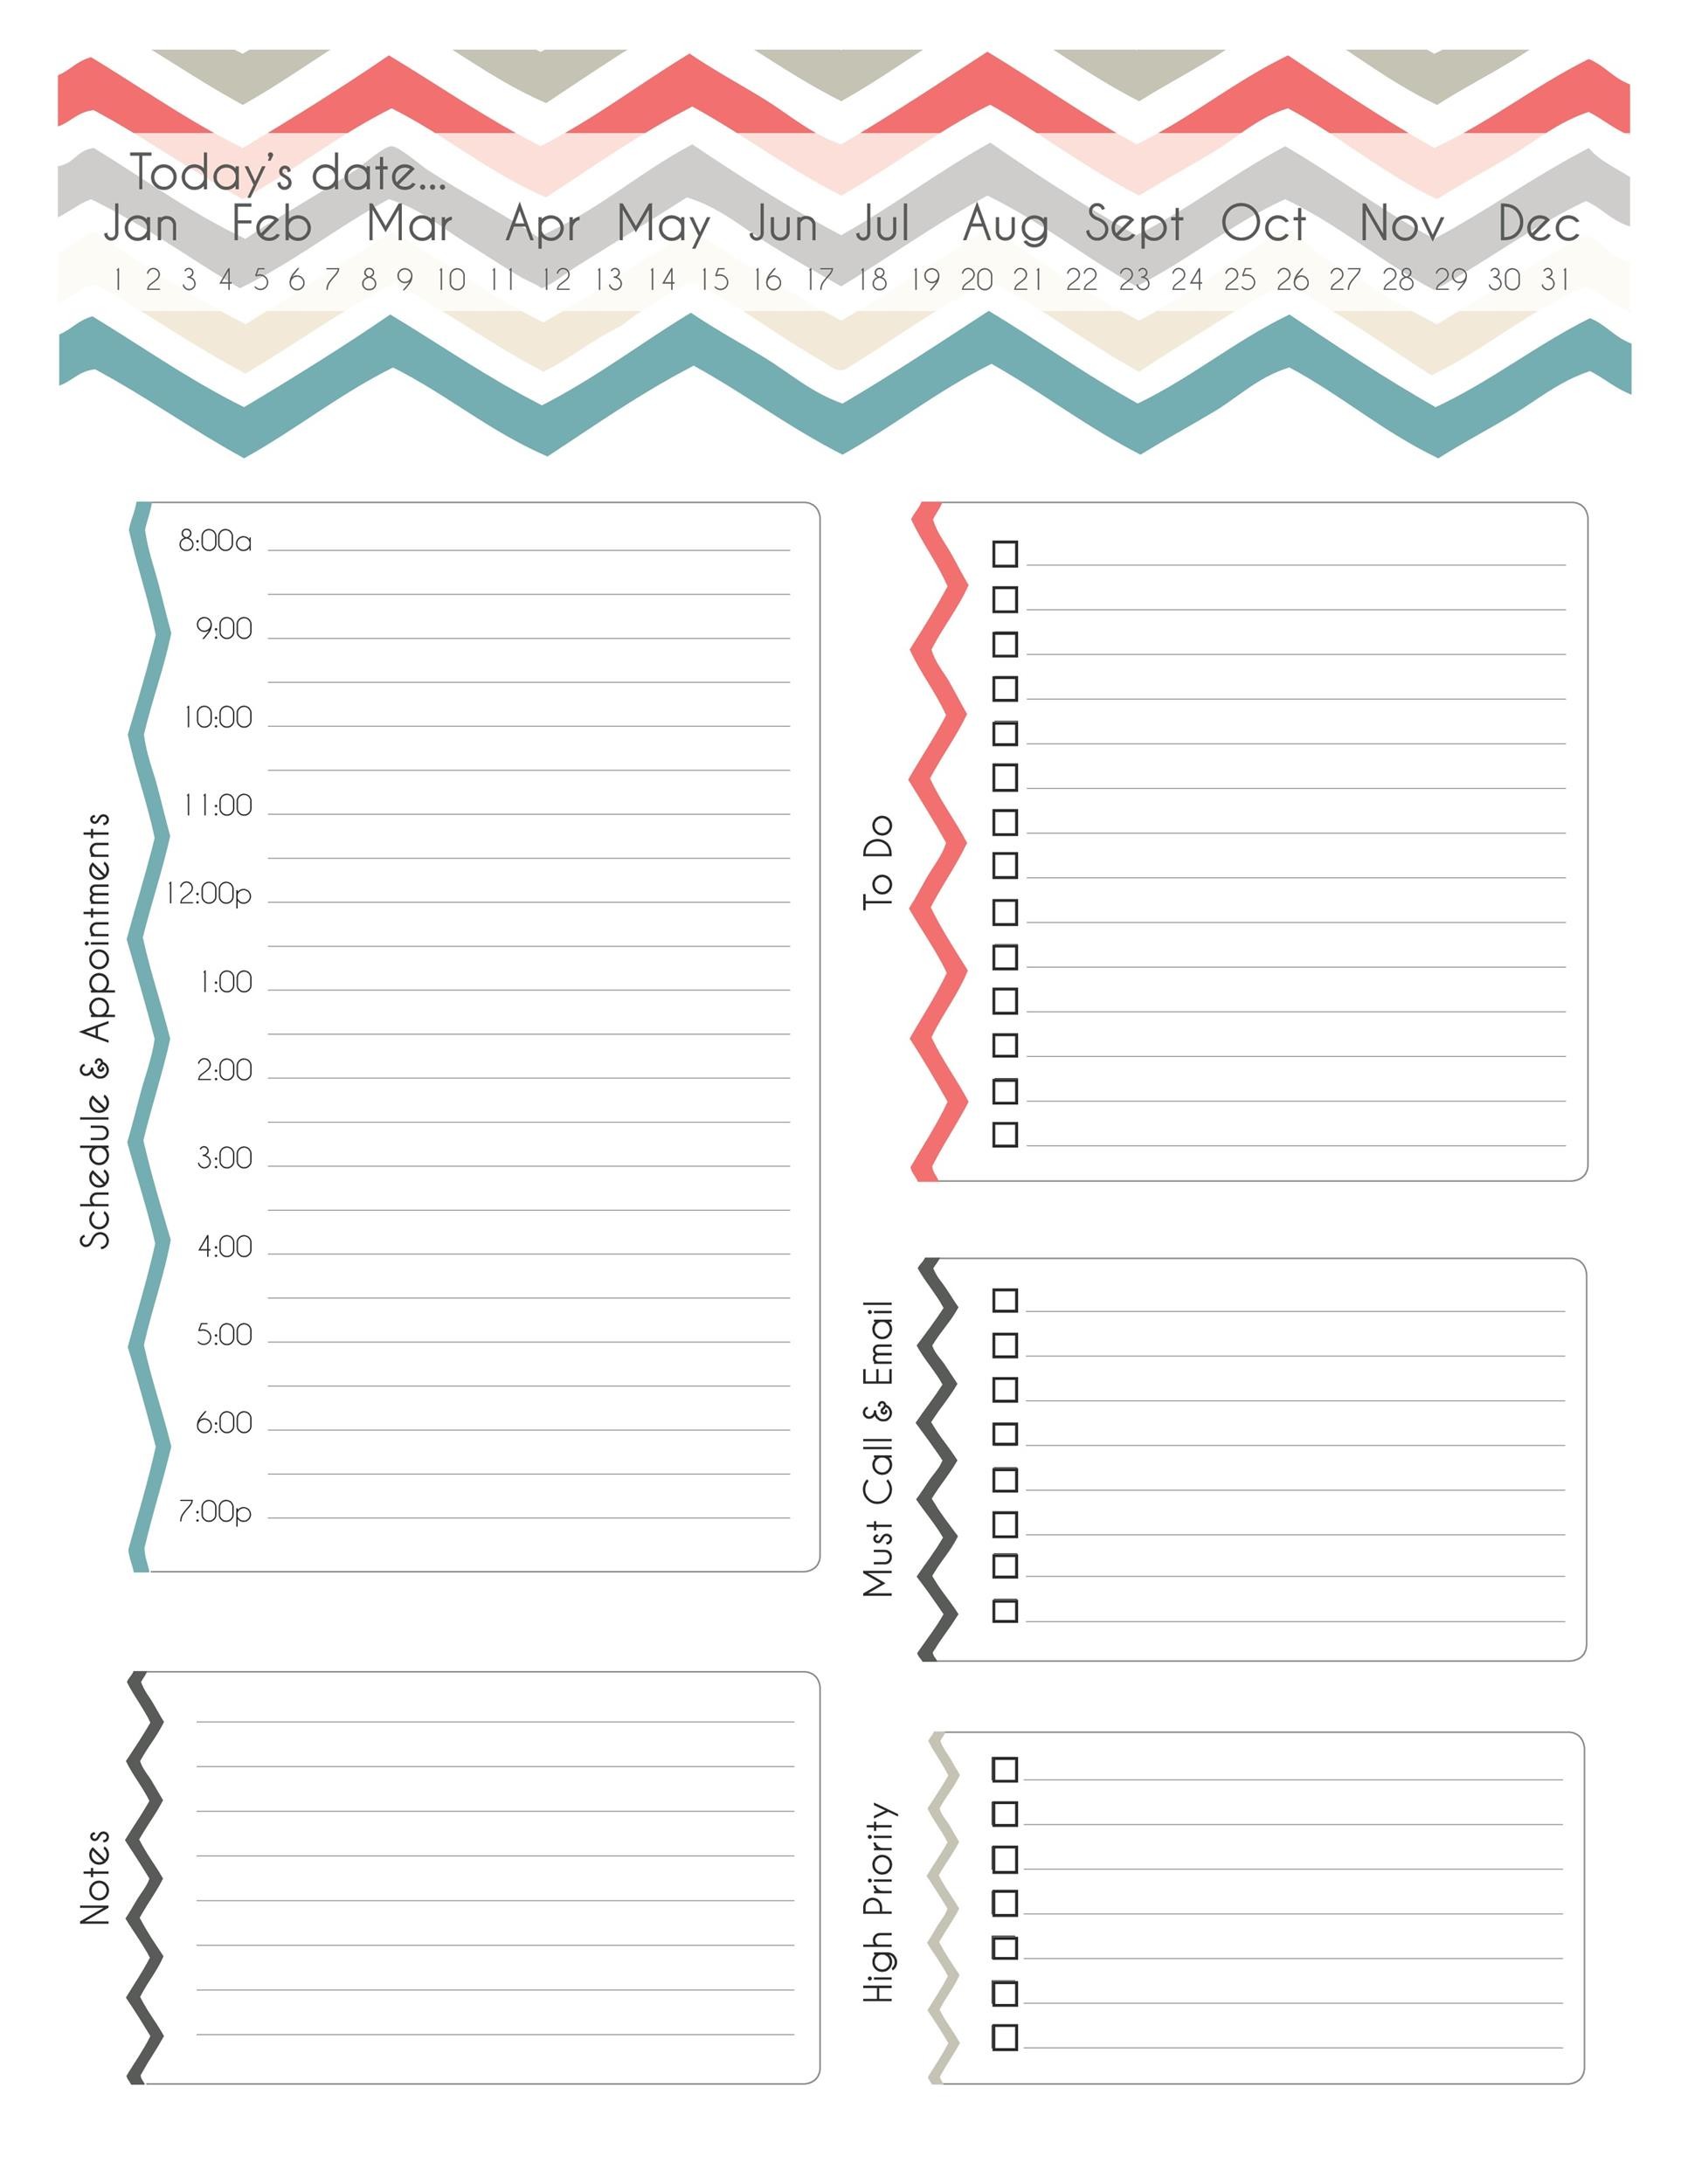 47-printable-daily-planner-templates-free-in-word-excel-pdf